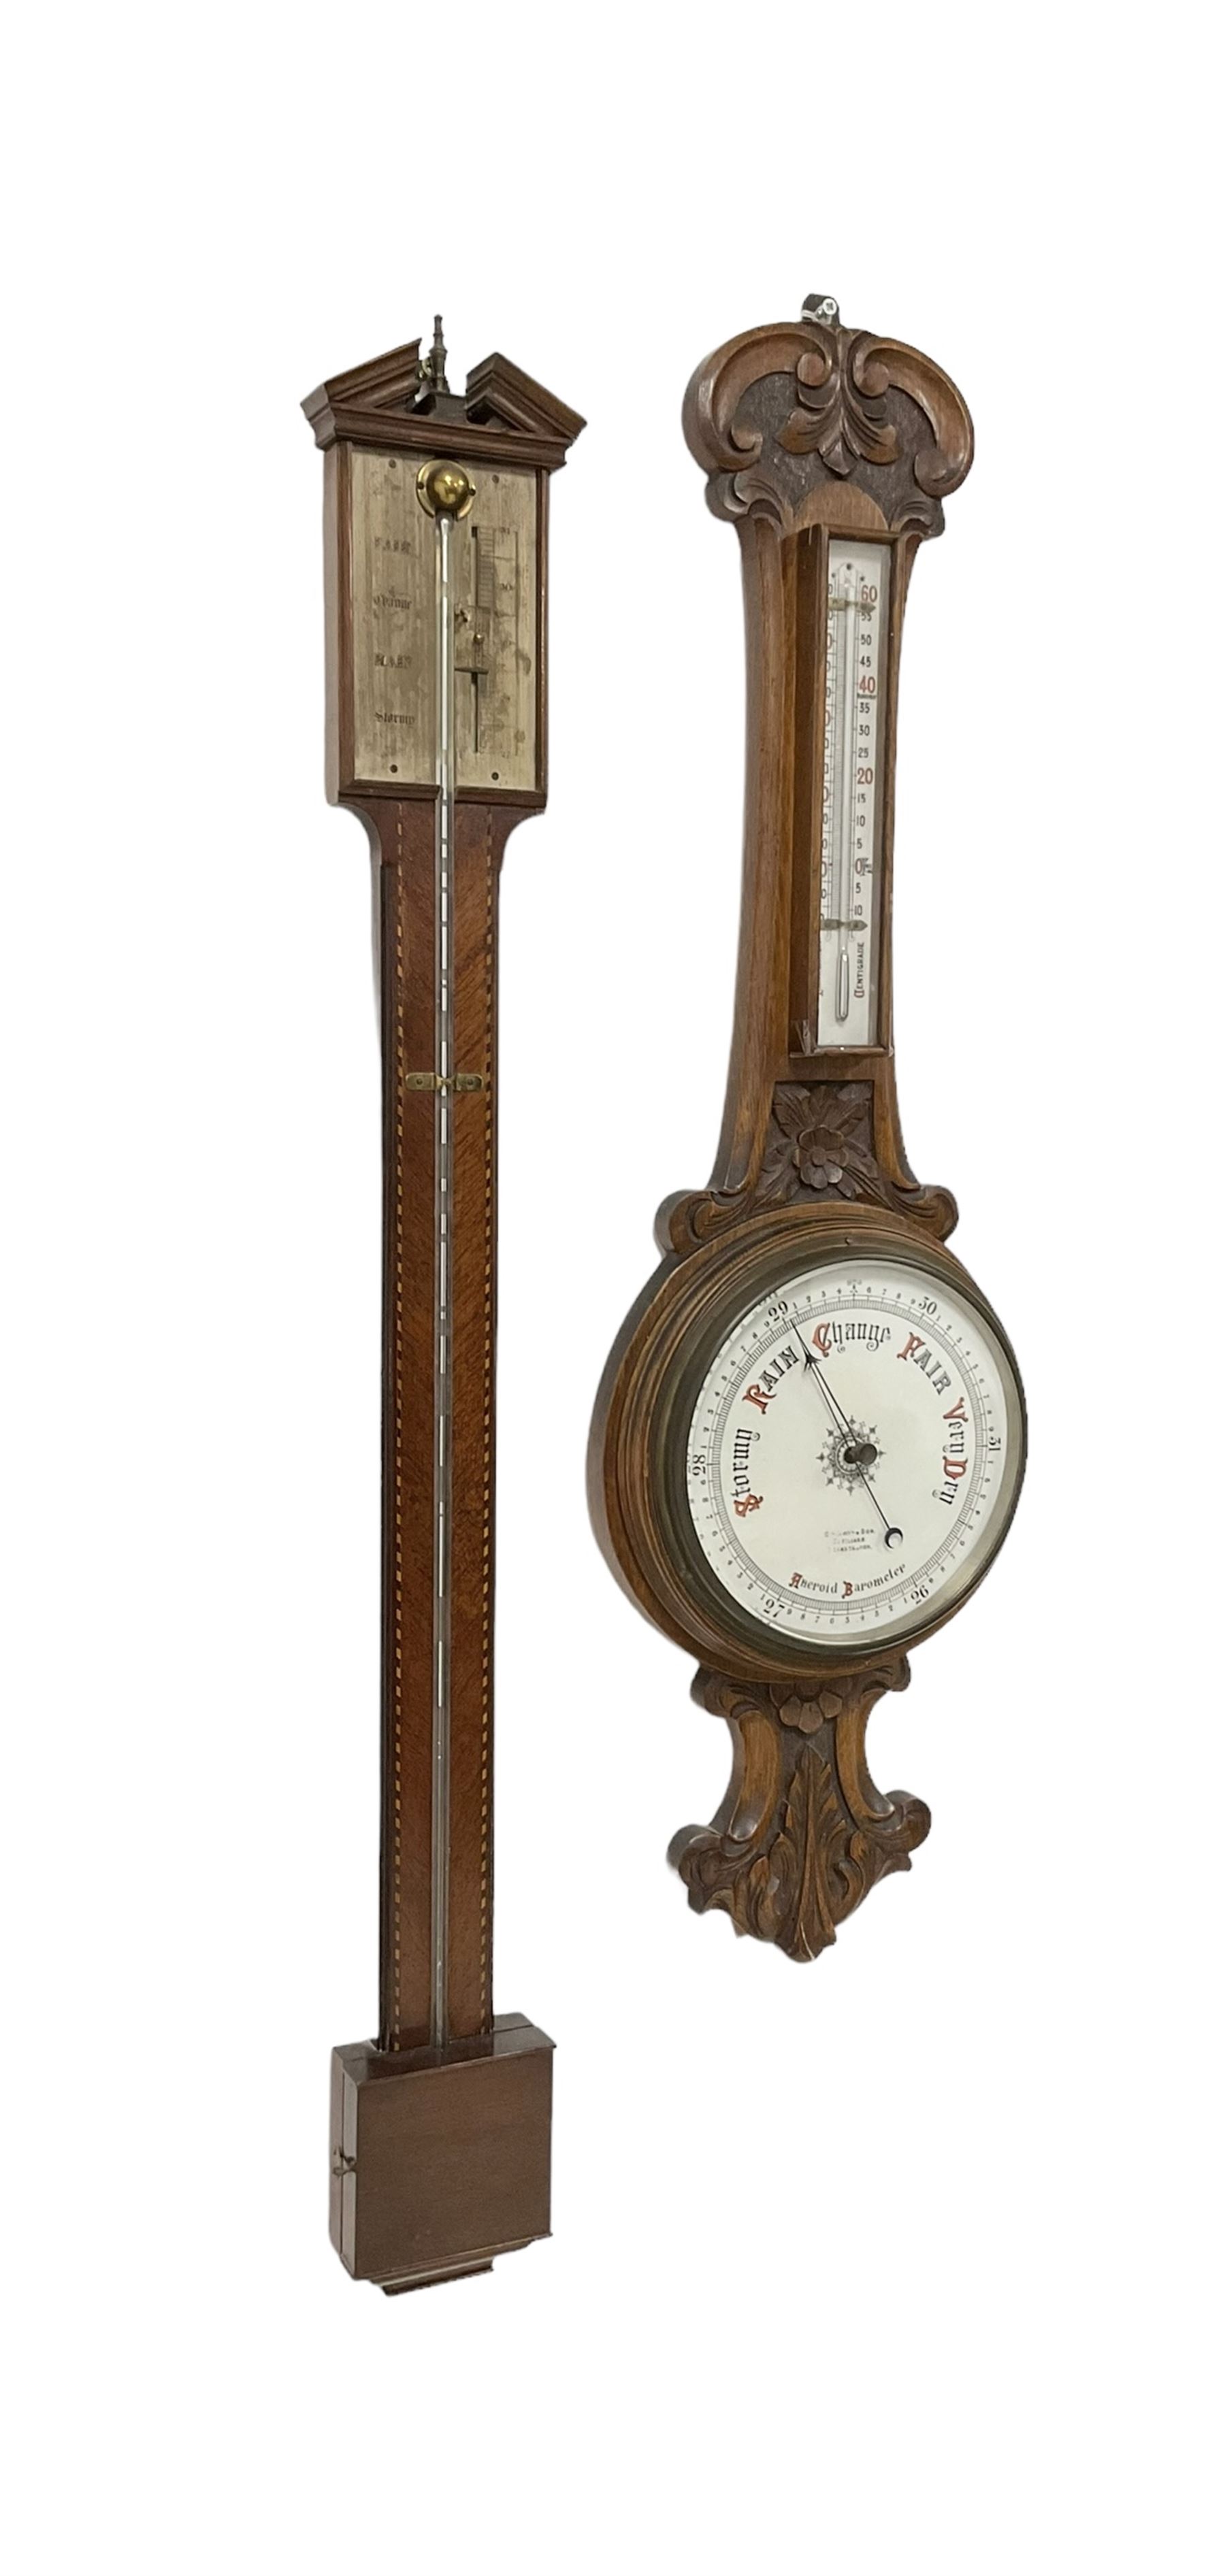 Mid-20th century mercury stick barometer and an early 20th century aneroid wheel barometer. Mahogany - Image 2 of 8